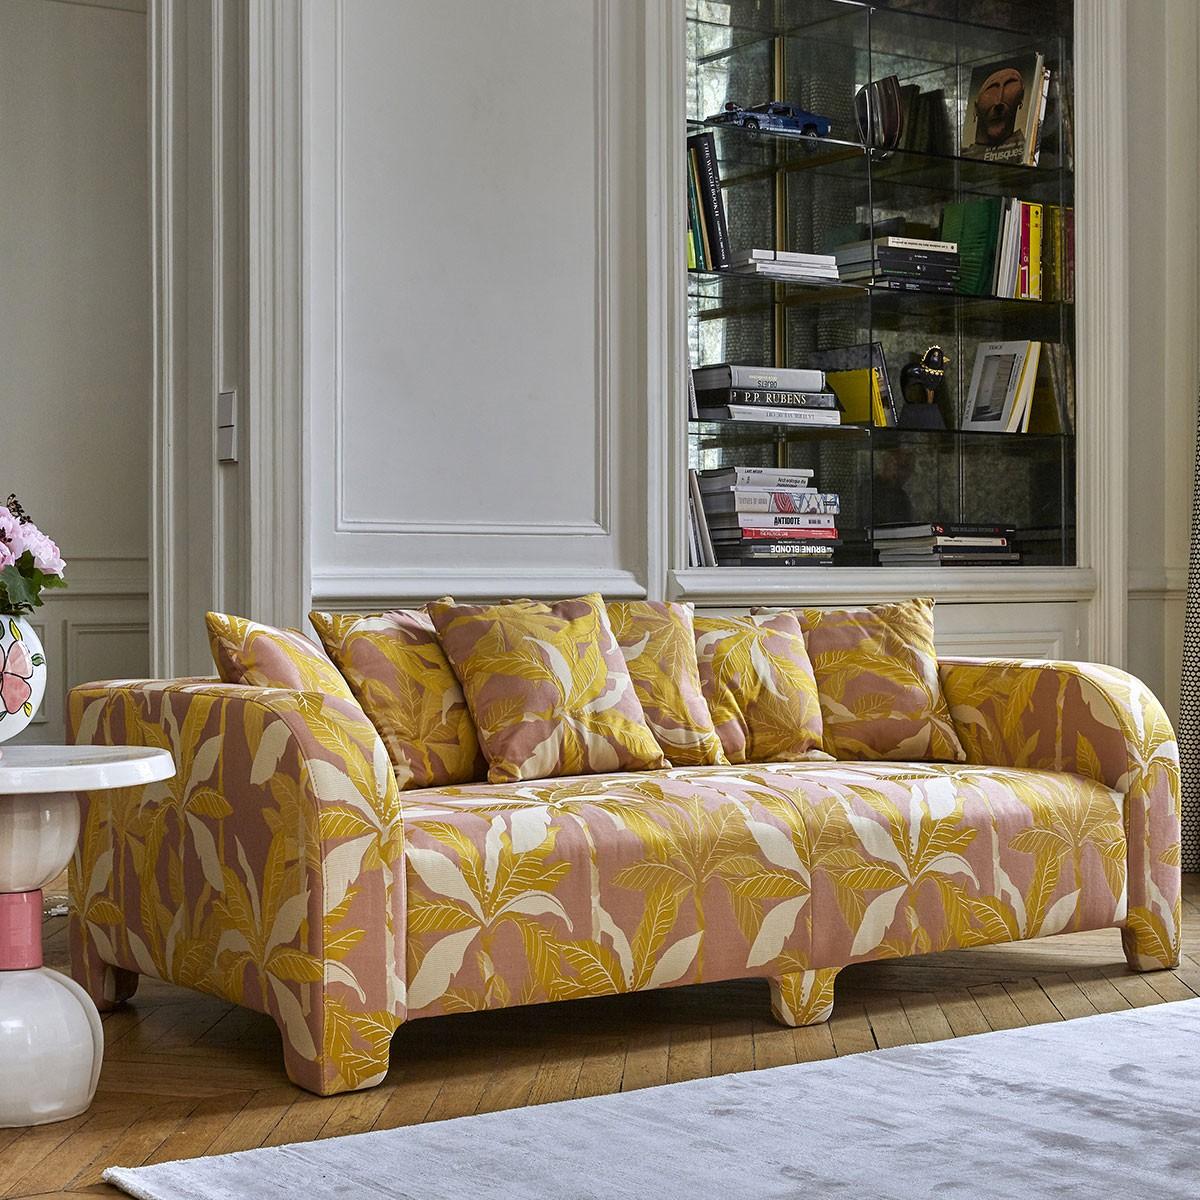 Popus Editions Graziella 3 Seater Sofa in Yellow Verone Velvet Upholstery

A foot that hides another. A cushion that hides another. A curve that hides another with contemporary lines and a base like a punctuation mark, this sofa gives pride of